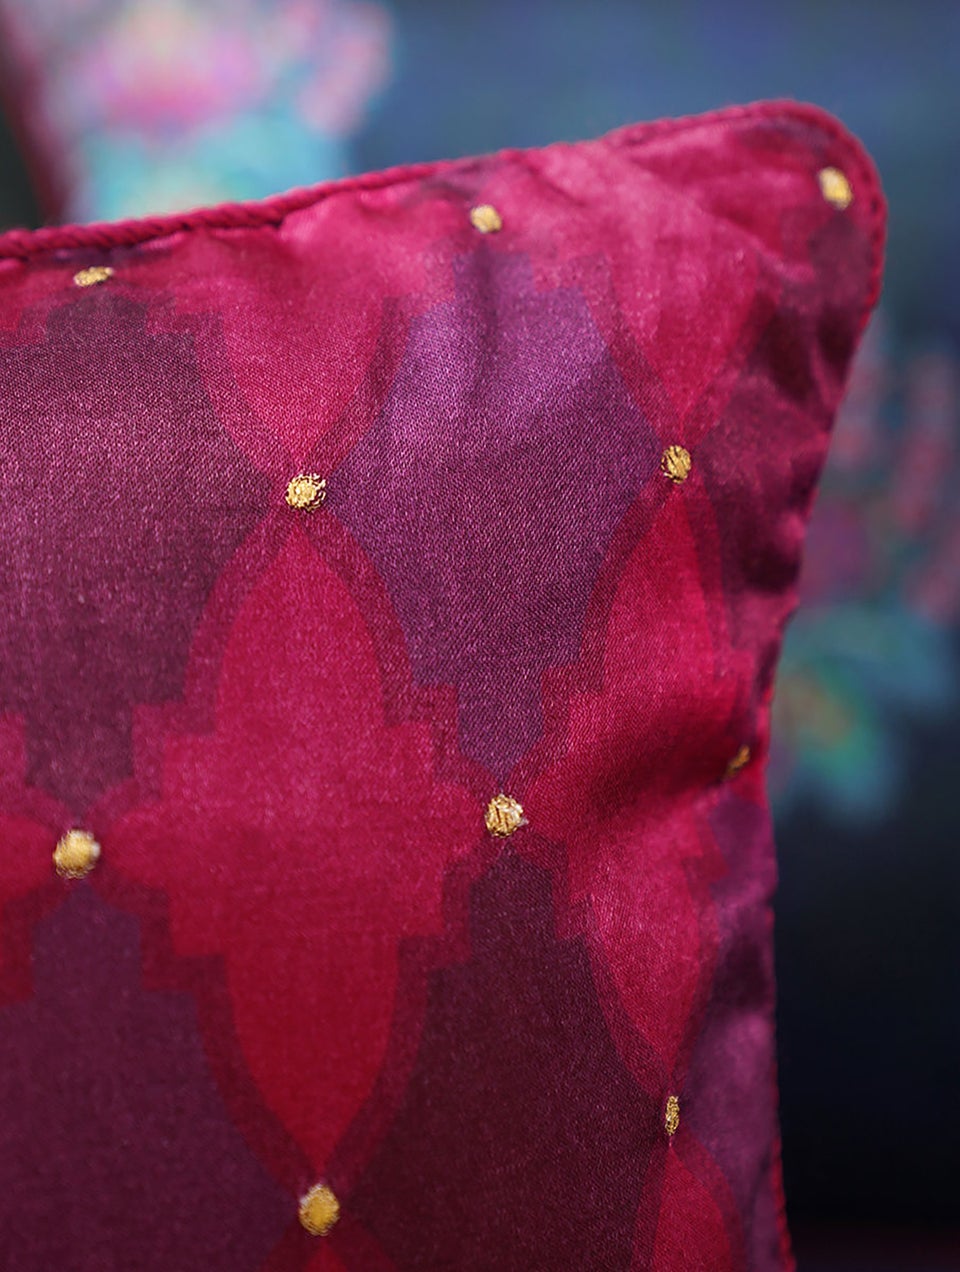 Pink Mushru Embroidered Cushion Cover